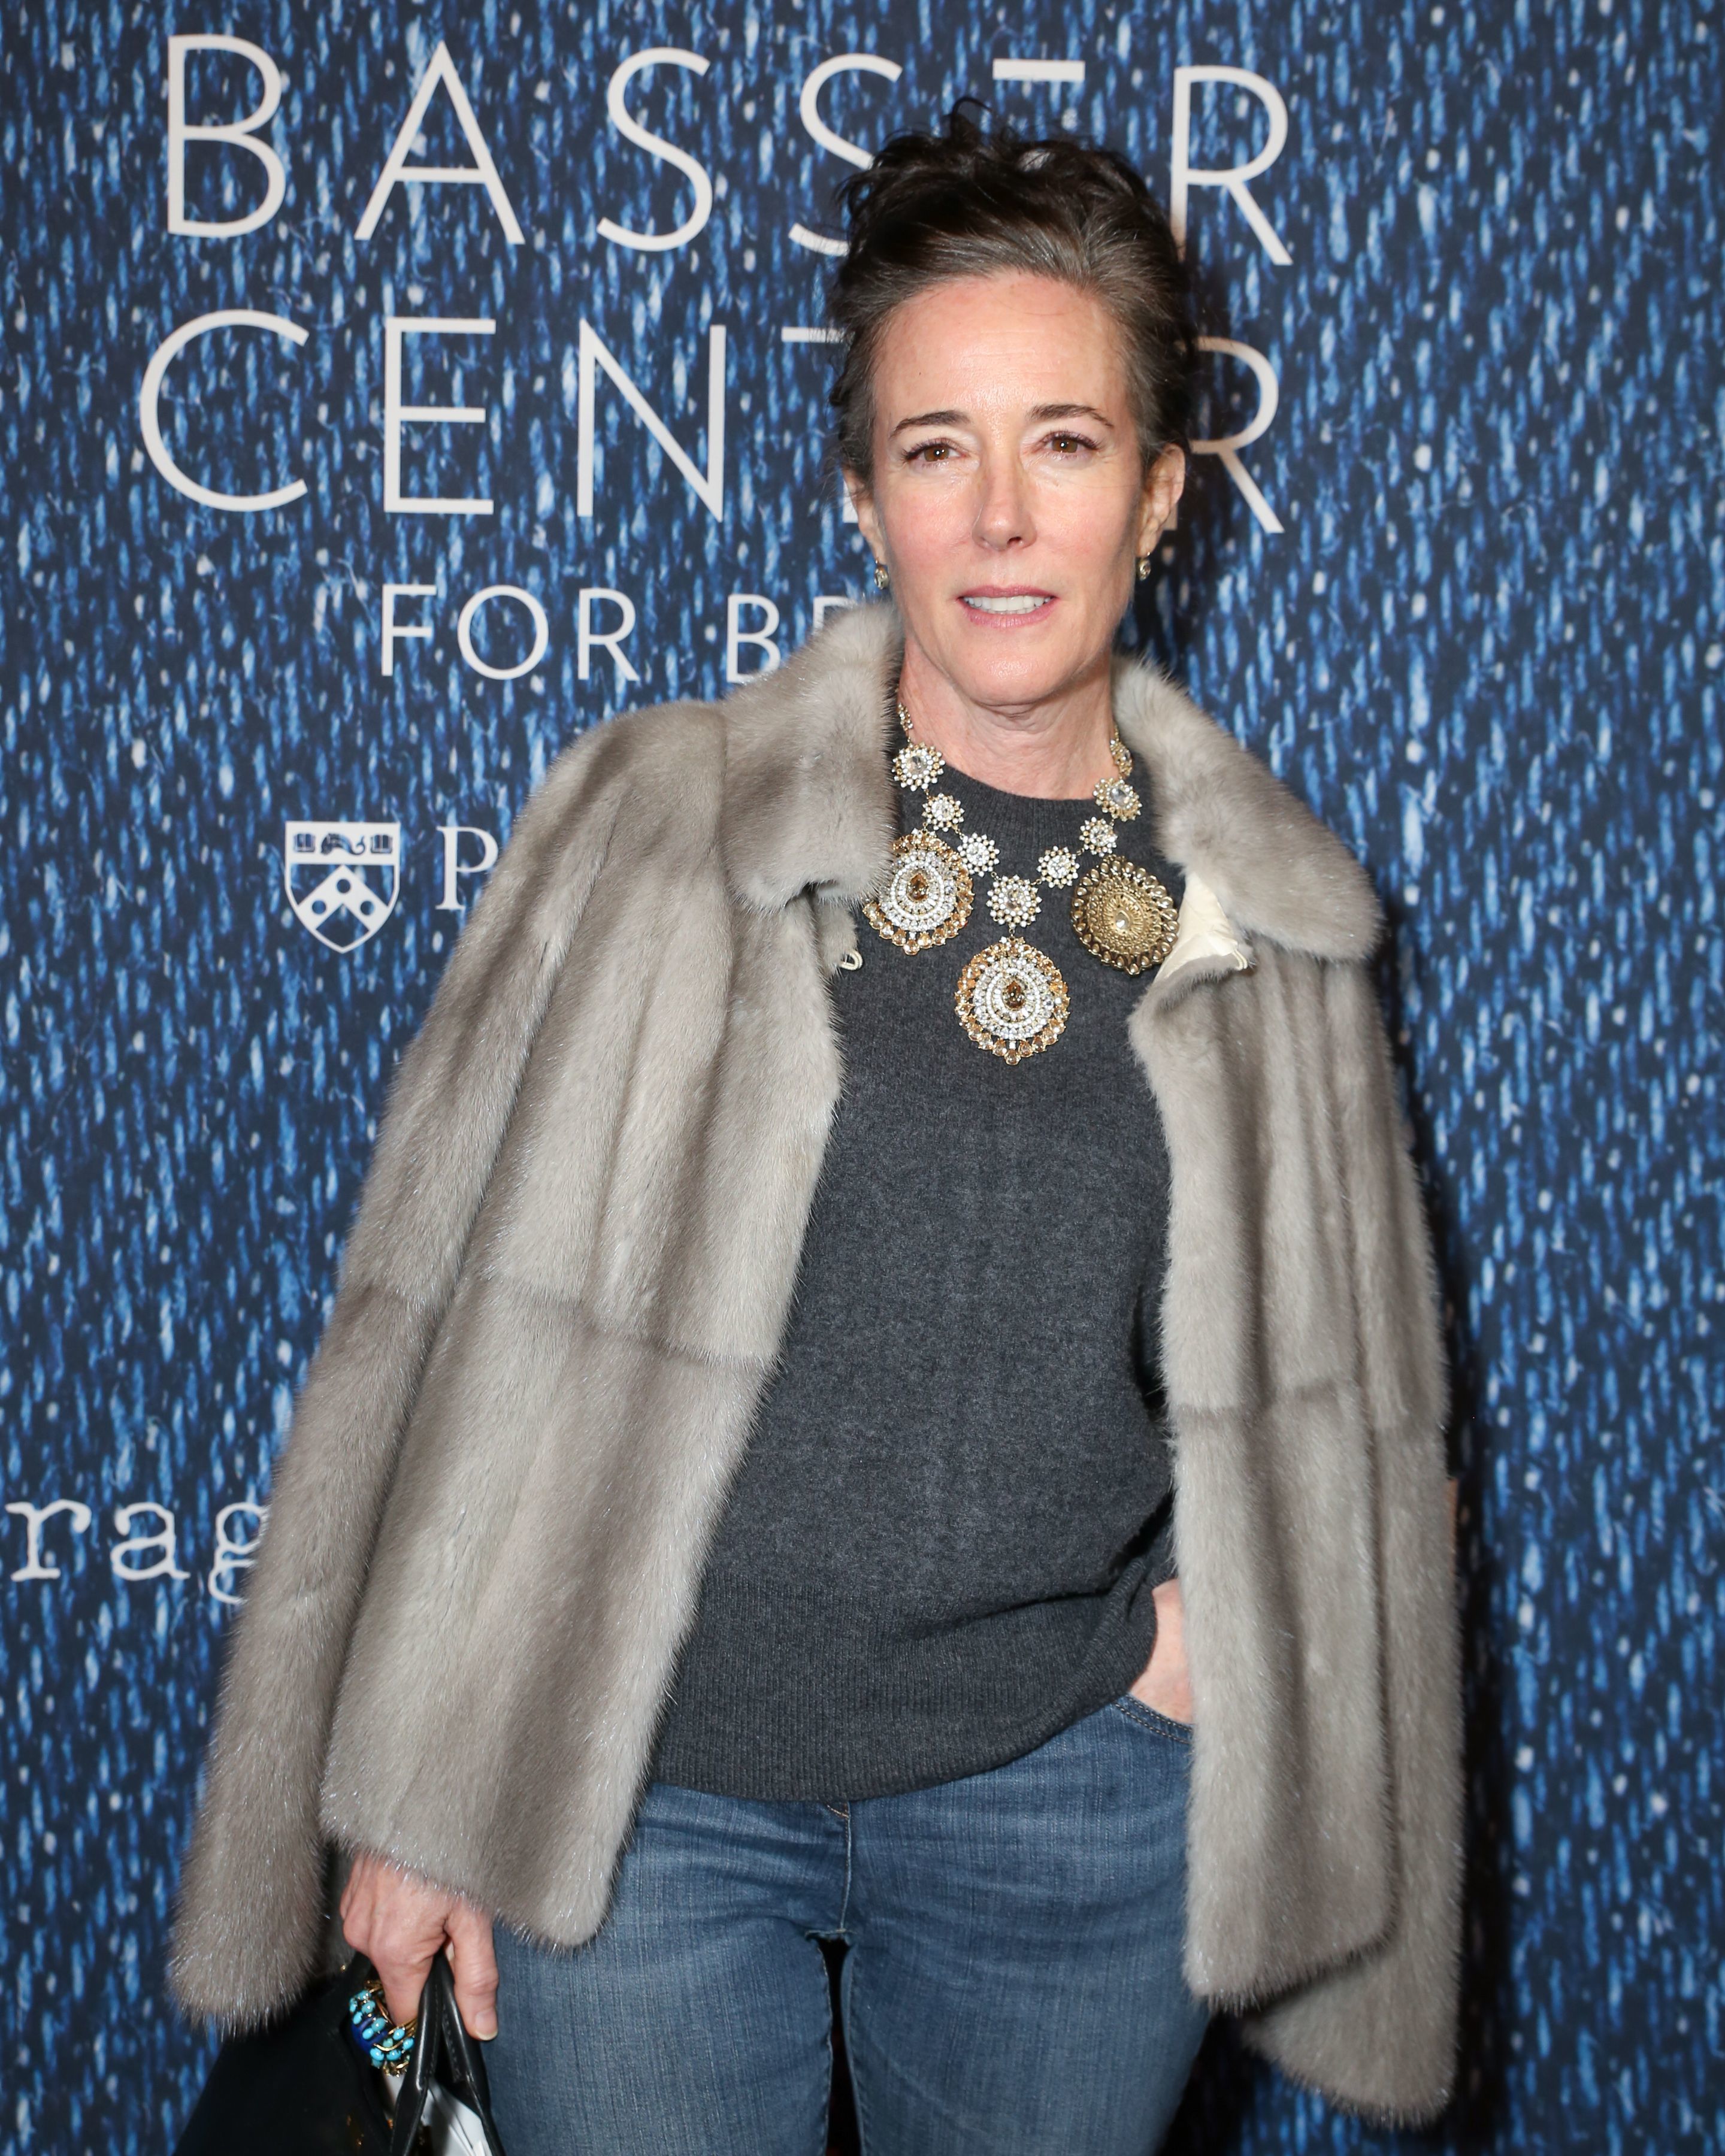 Celebrities react to Kate Spade's suicide | Gallery 